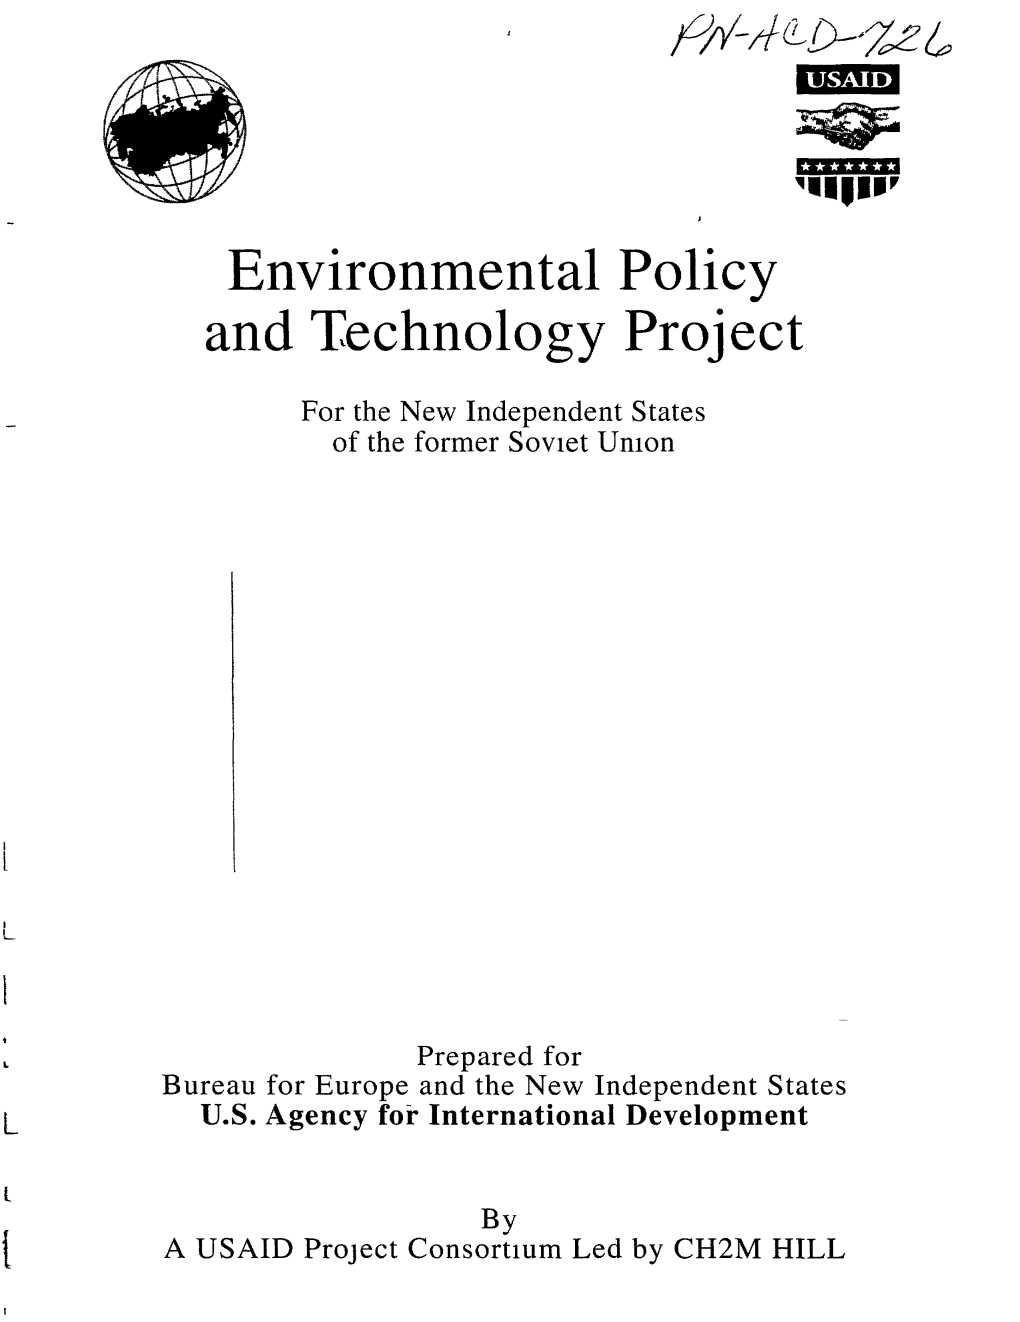 Environmental Policy and Technology Project